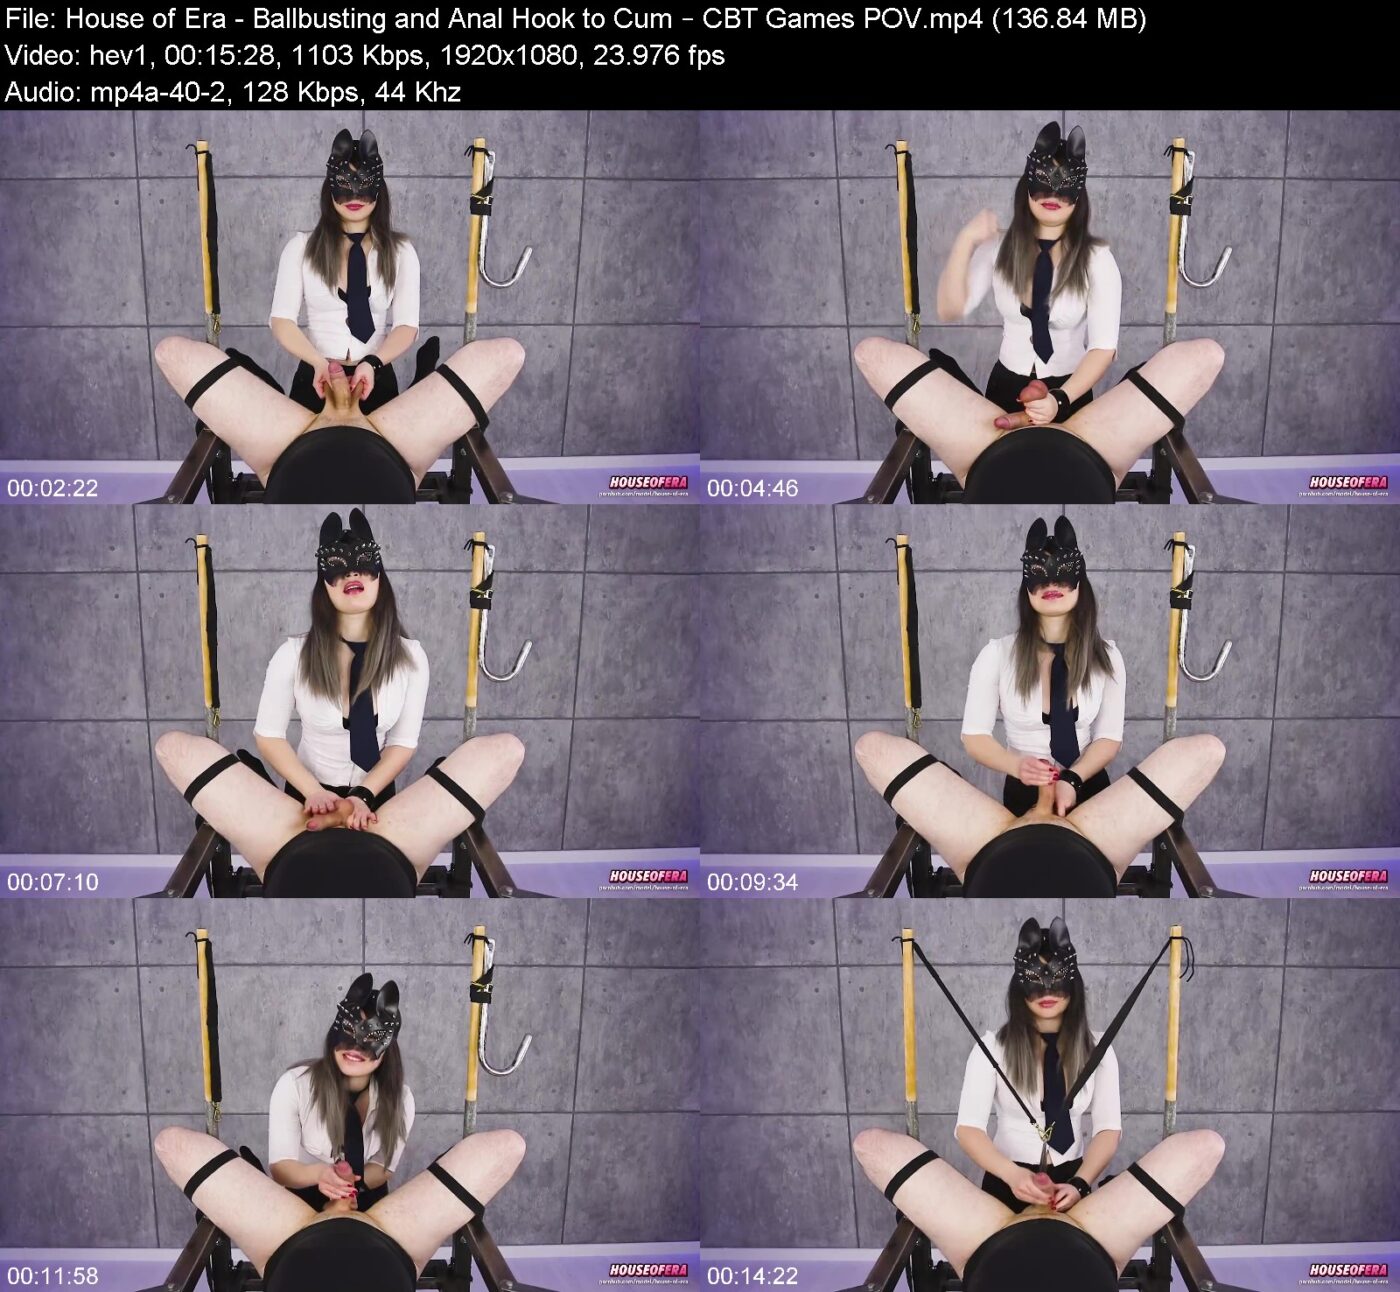 Actress: House of Era. Title and Studio: Ballbusting and Anal Hook to Cum – CBT Games POV